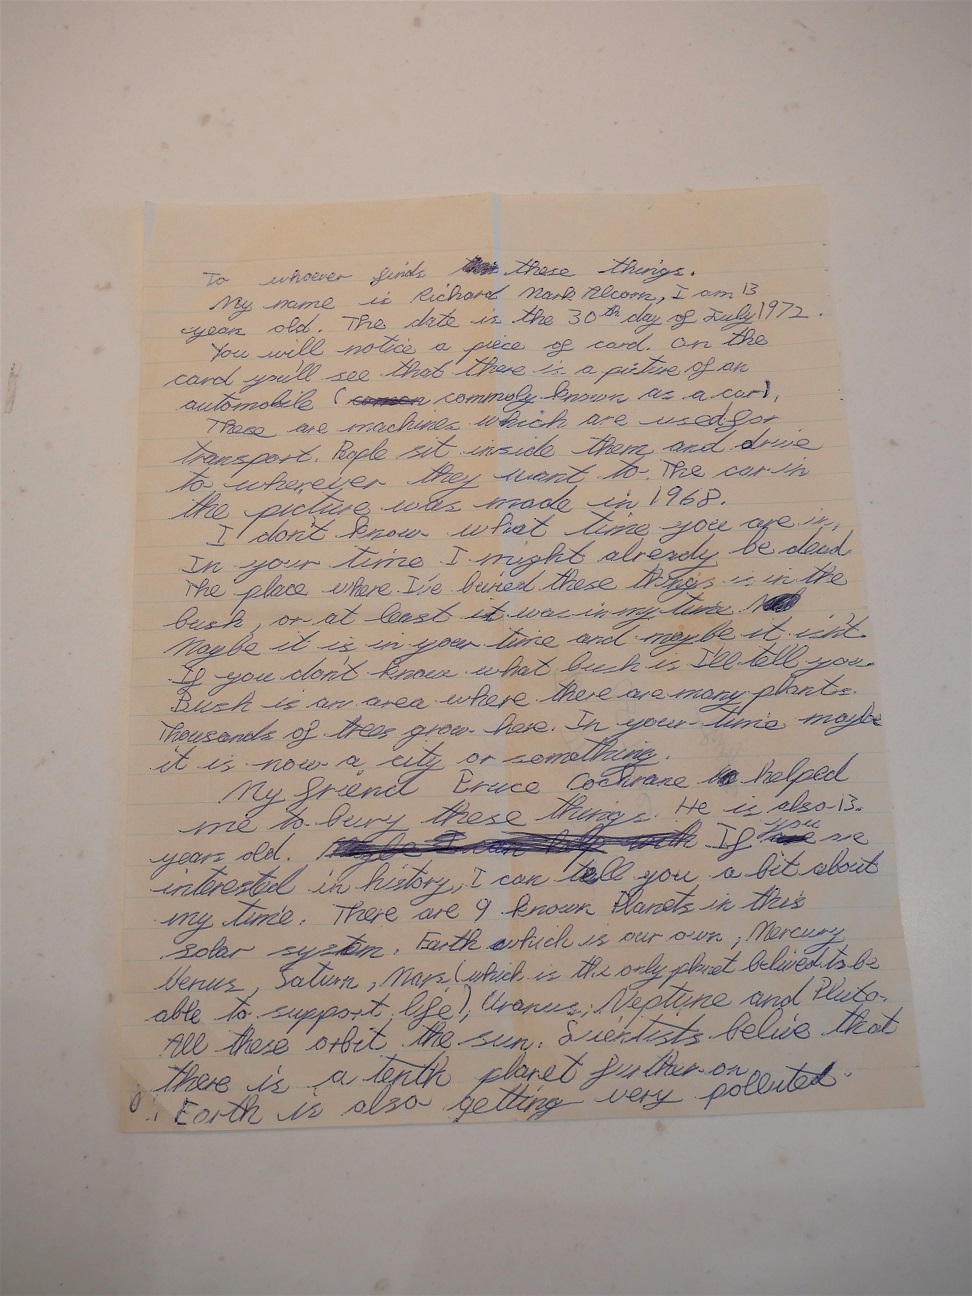 A handwritten letter from a time capsule.